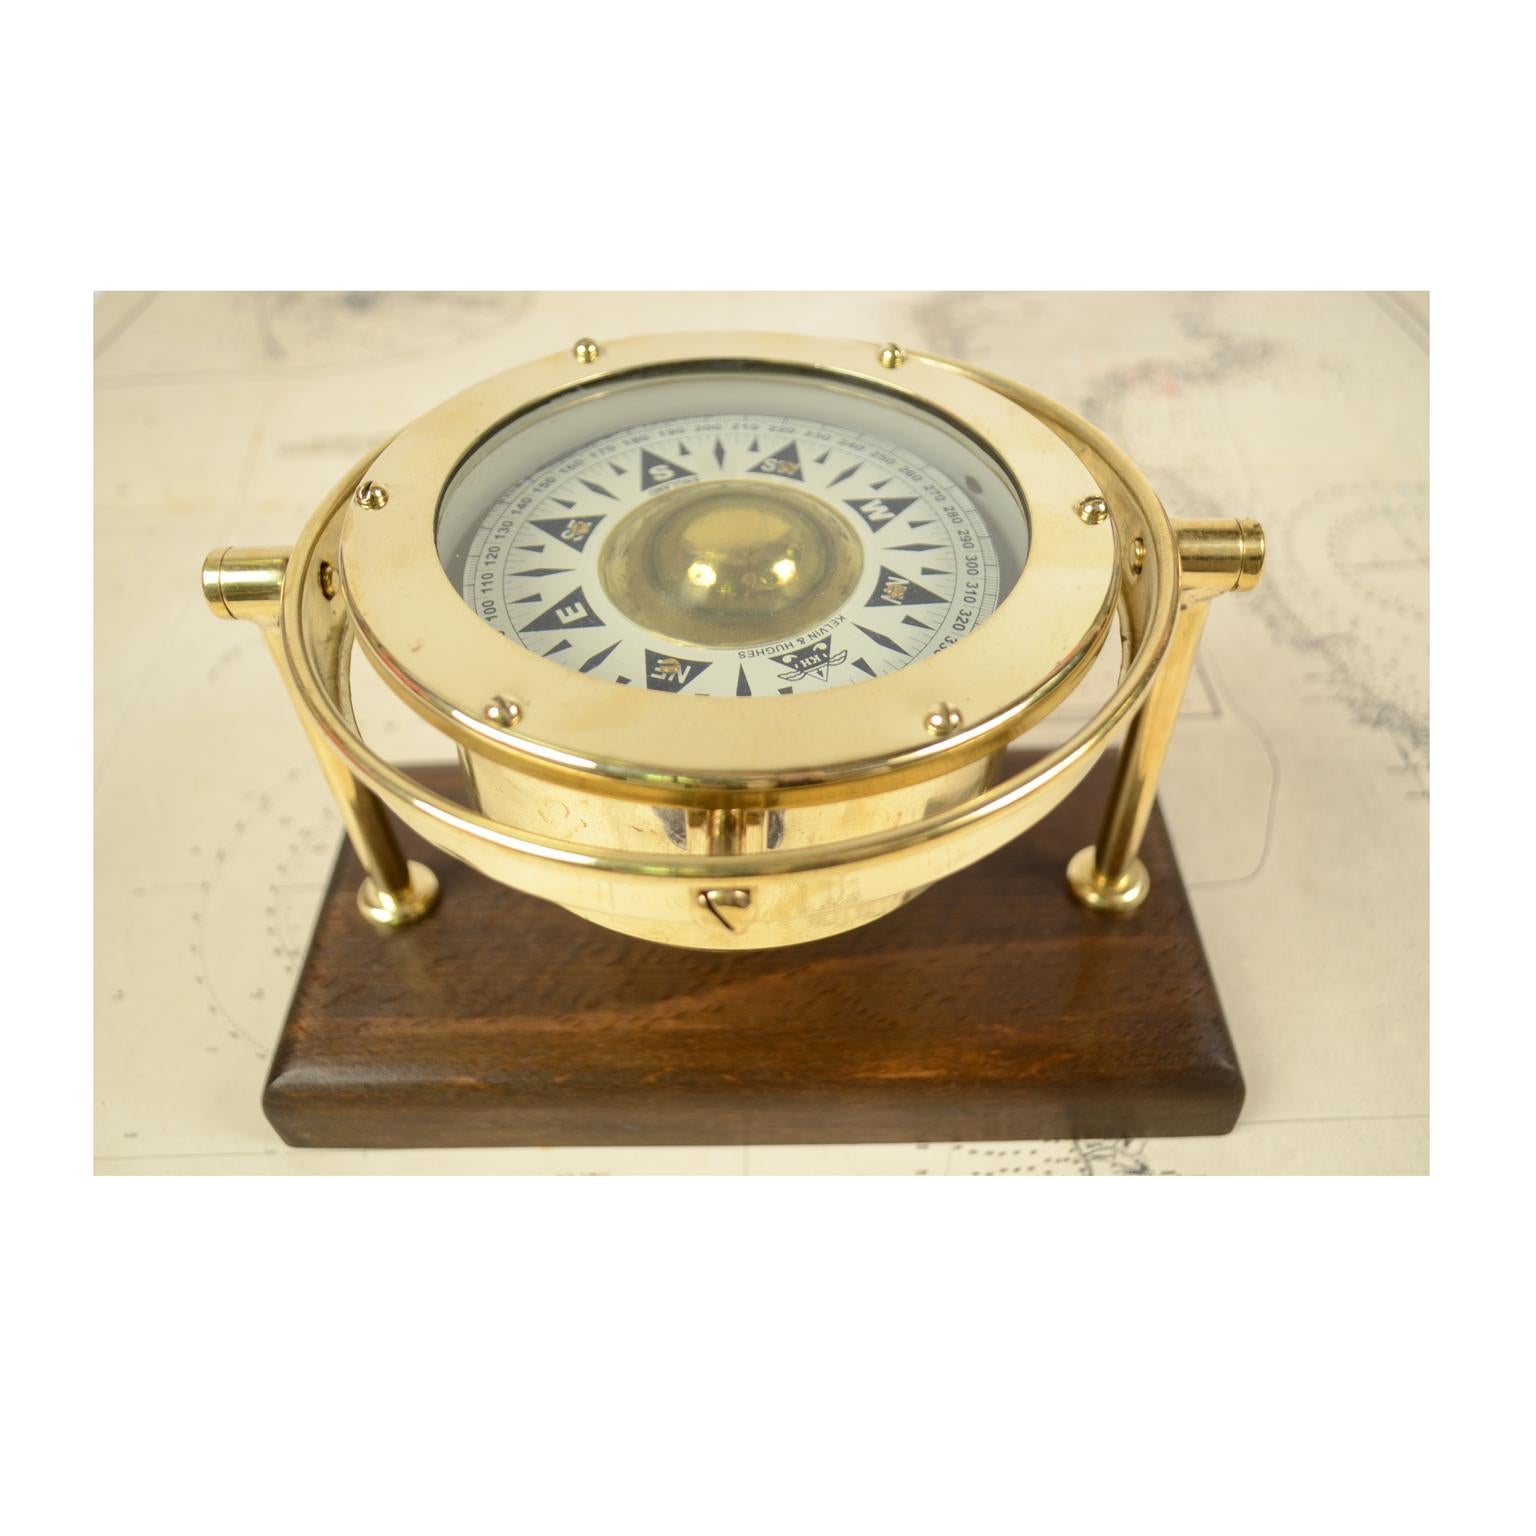 Nautical liquid compass, brass, on universal joint, mounted on wooden board. Made by Kelvin & Hughes Limited at the end of the 1940s. The compass has a cylindrical brass container, on the bottom of which a stem of hard metal is fixed, on which there